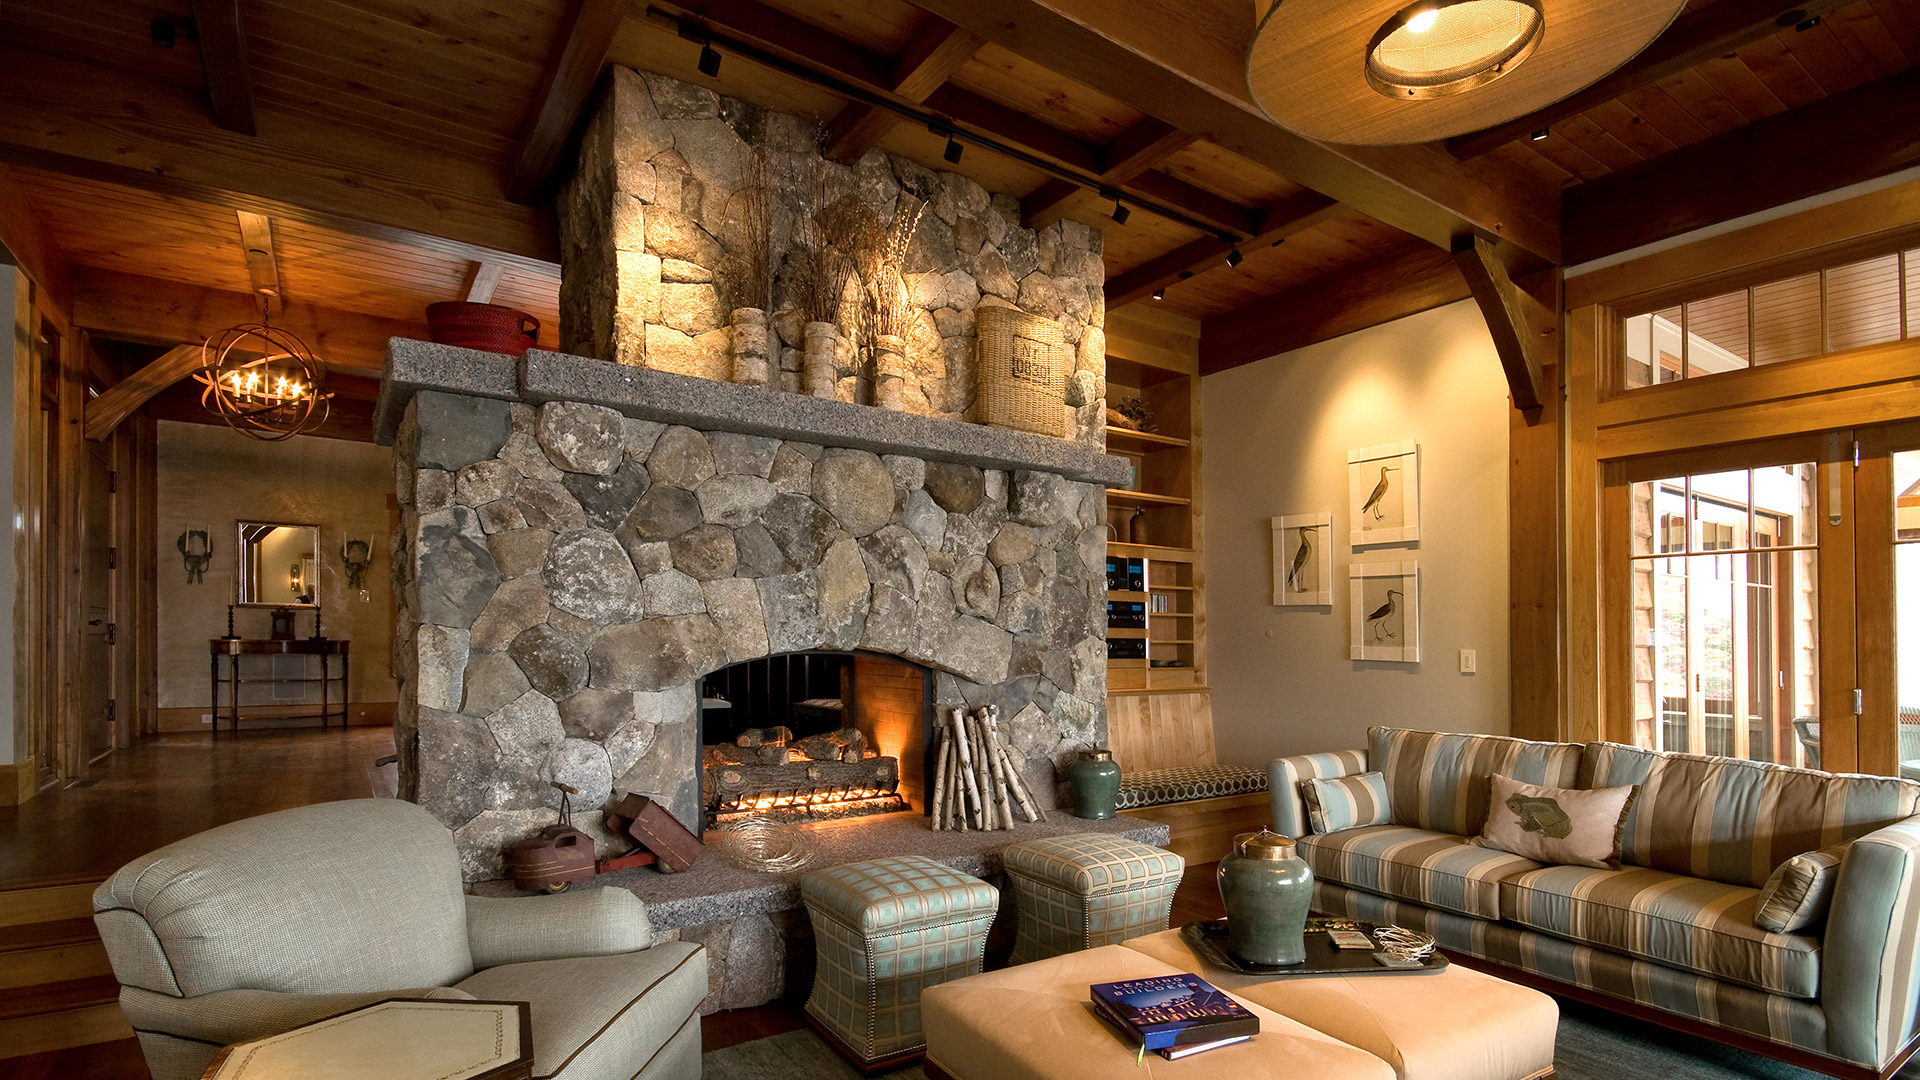 Lake Wentworth, New Hampshire post and beam living room with stone fireplace